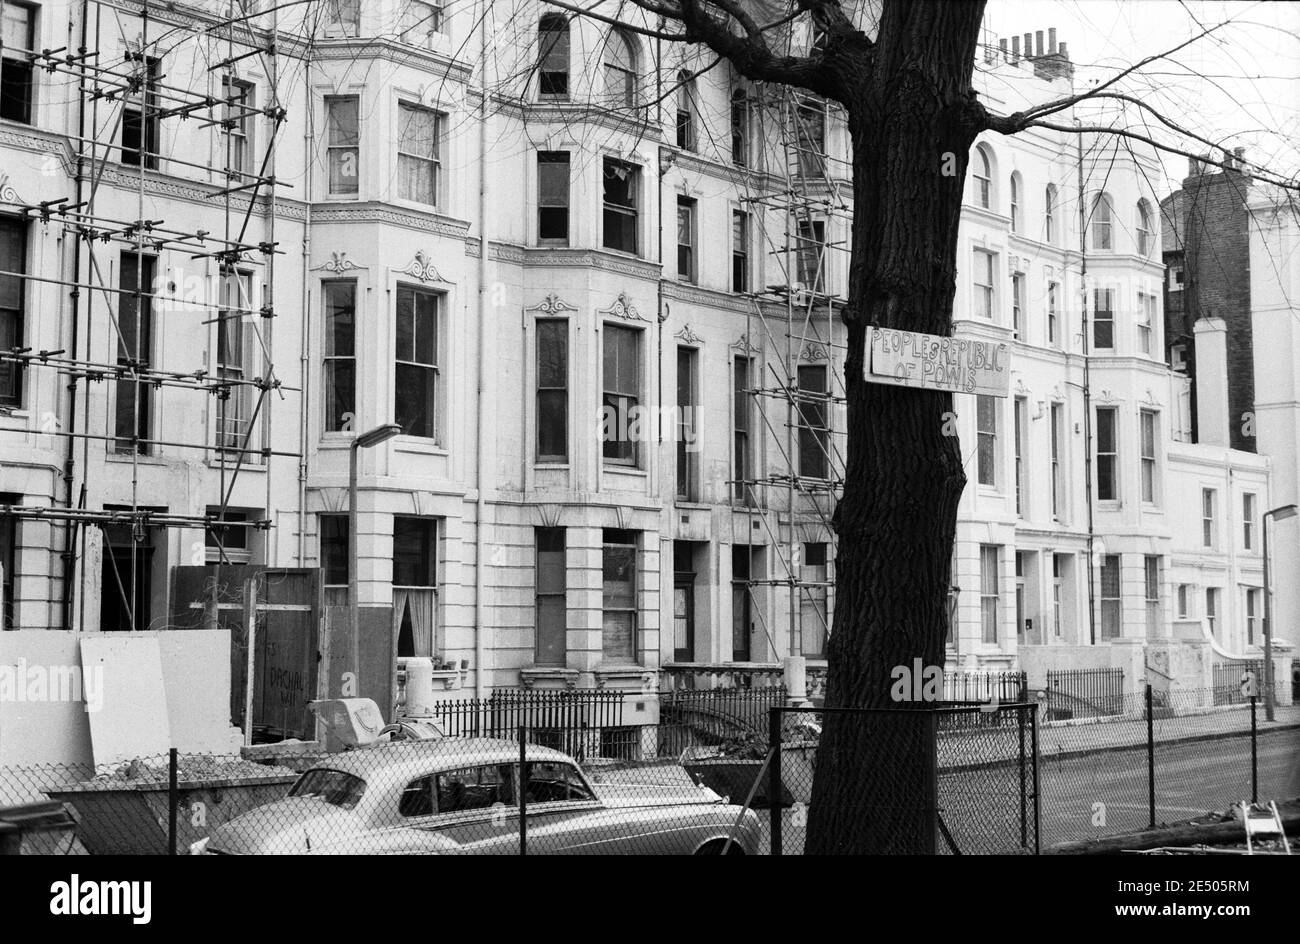 UK, West London, Notting Hill, 1973. Rundown & dilapidated large four-story houses are starting to be restored and redecorated. Facing approximately No.20 Powis Square from Powis Square play area. The sign on the tree reads 'Peoples Republic of Powis'. A Rolls Royce car is parked opposite scaffolding. Stock Photo